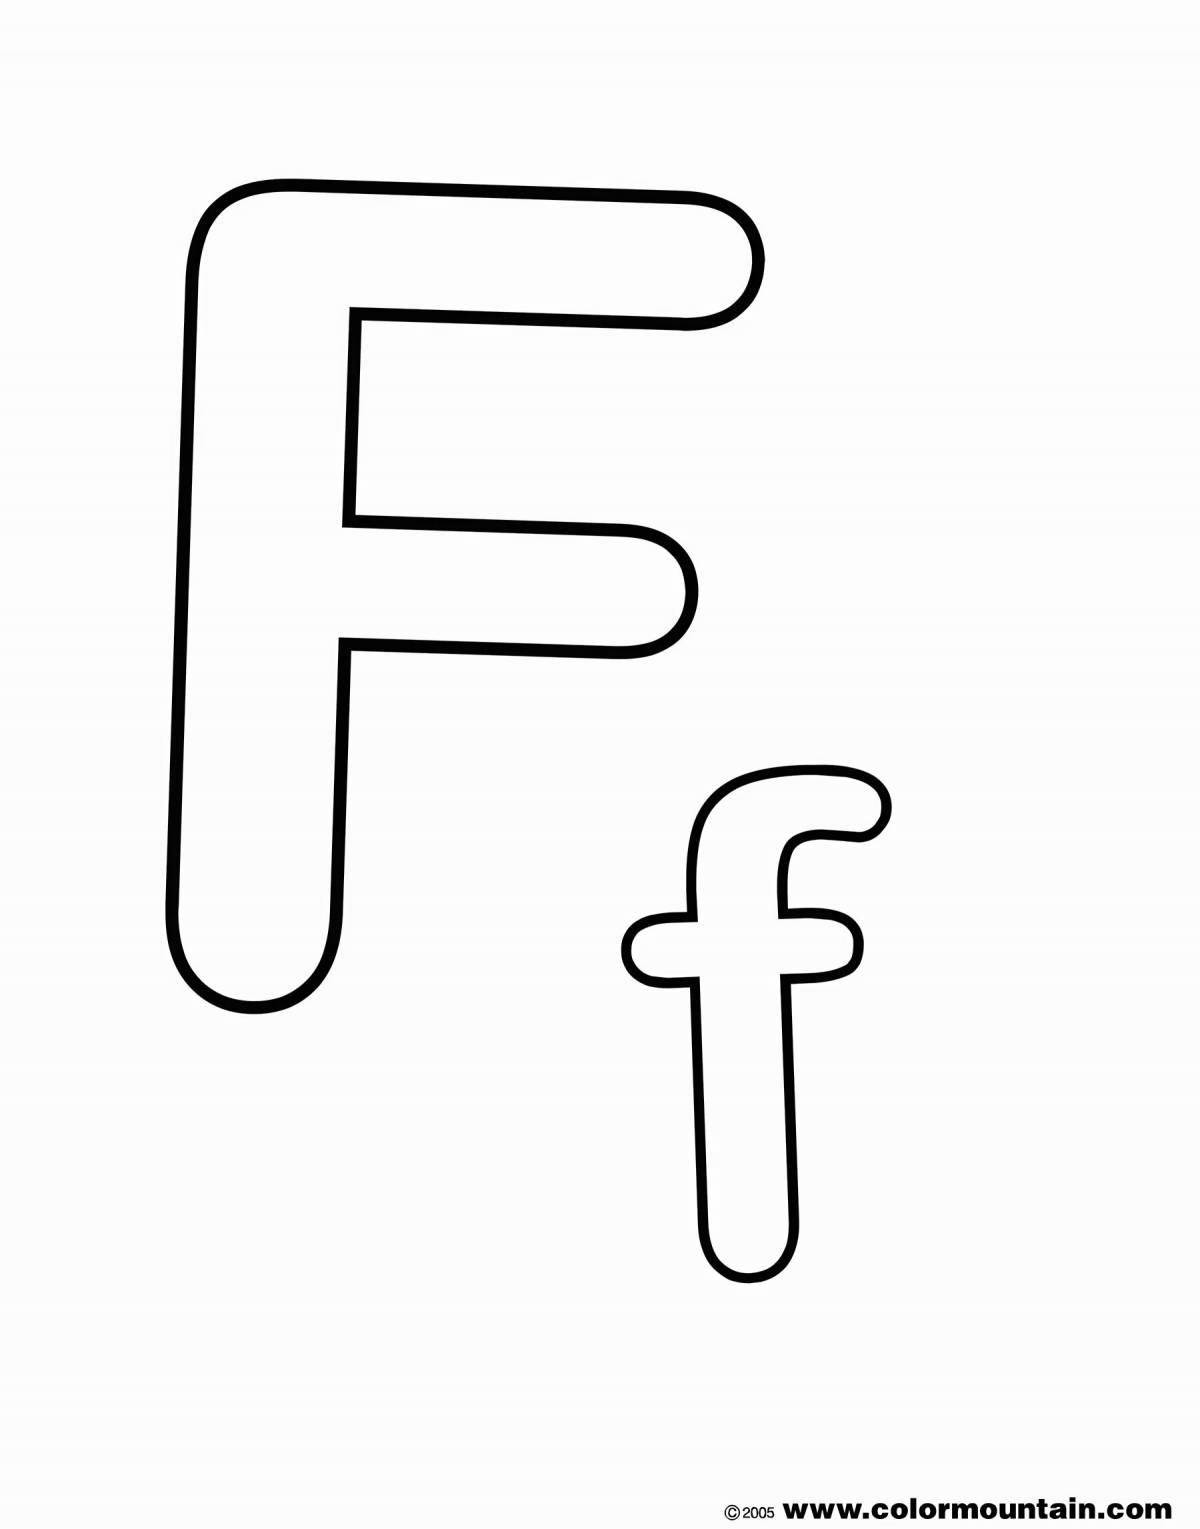 Exciting letter f coloring page